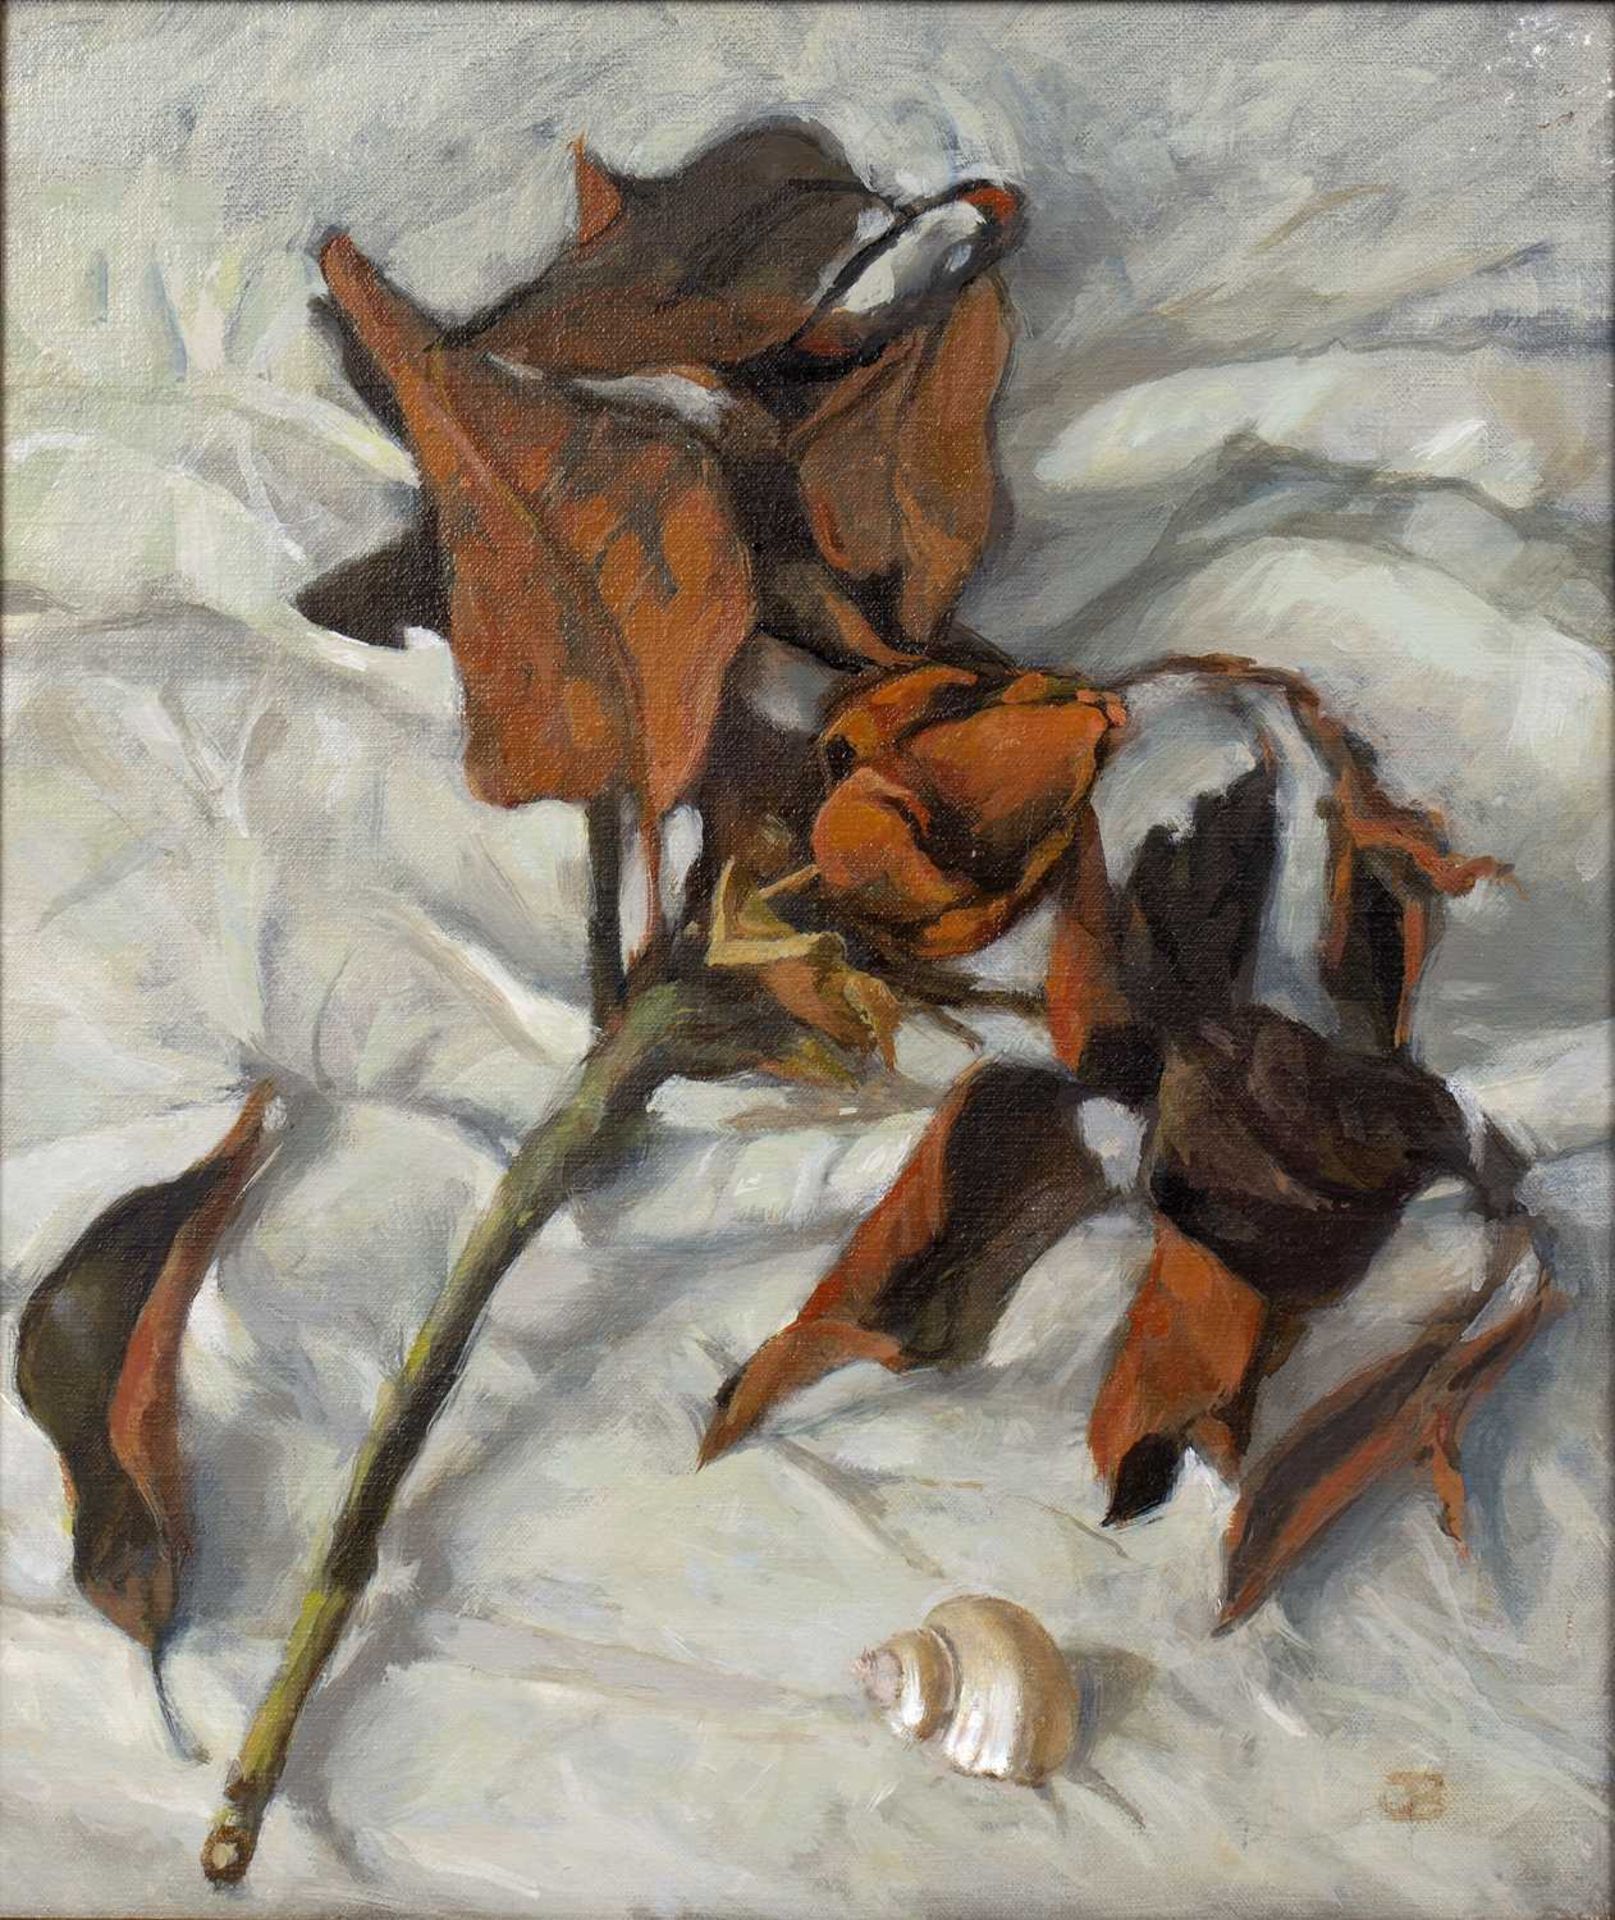 Jane Bond (1939), 'Nature Morte', oil on canvas 41cm x 34cm Exhibited at The New English Art Club,